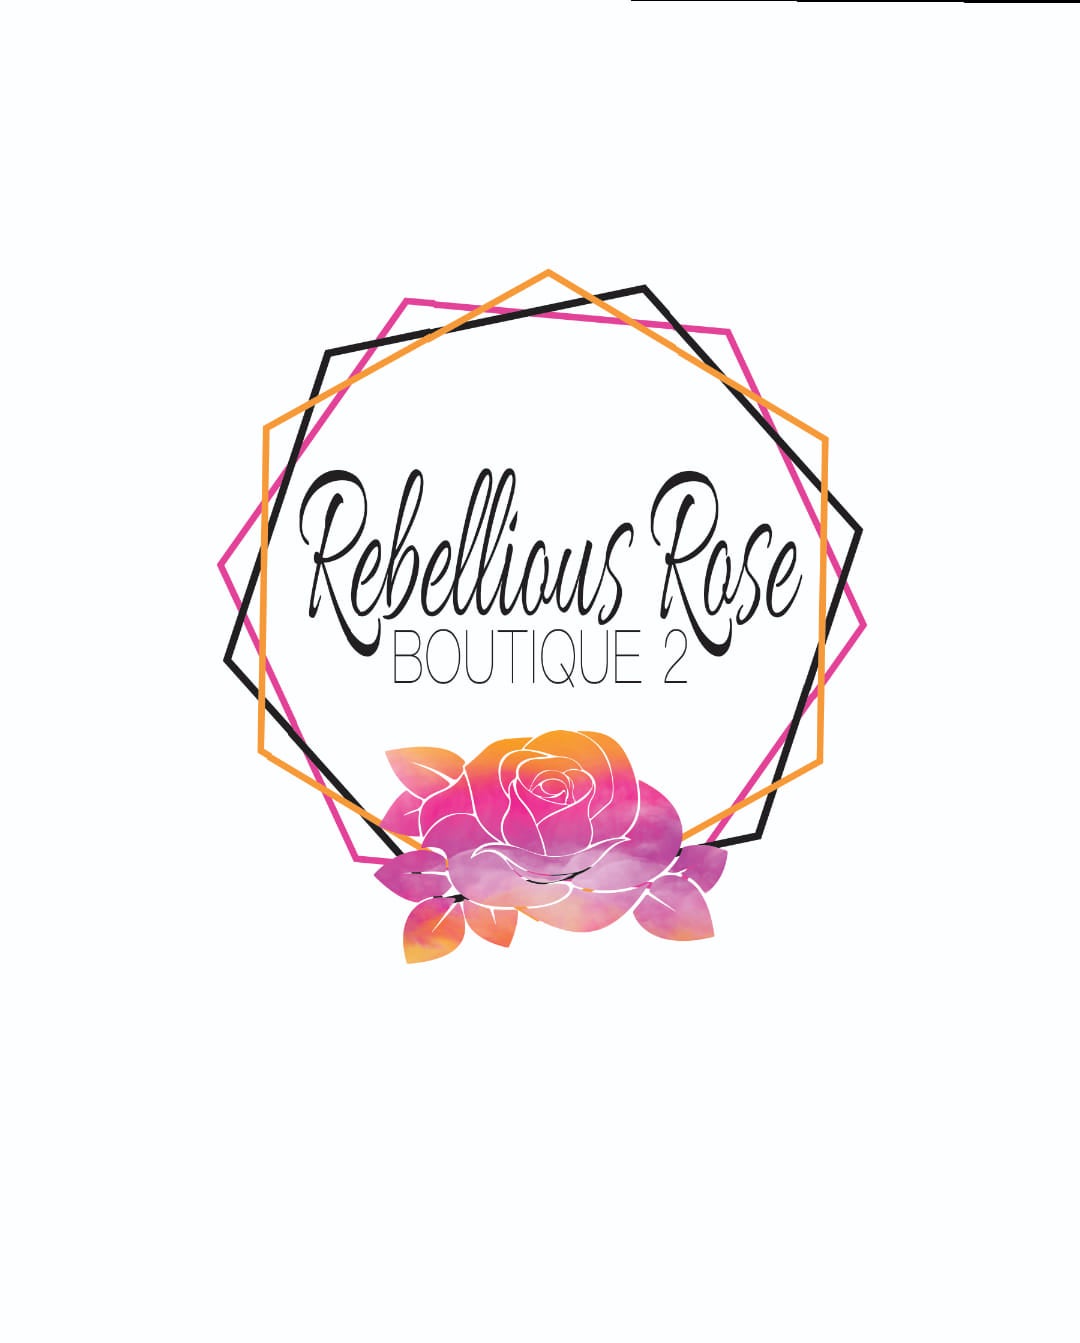 RESTOCK - TOWN SQUARE SLIDES – My Rebellious Roses Boutique